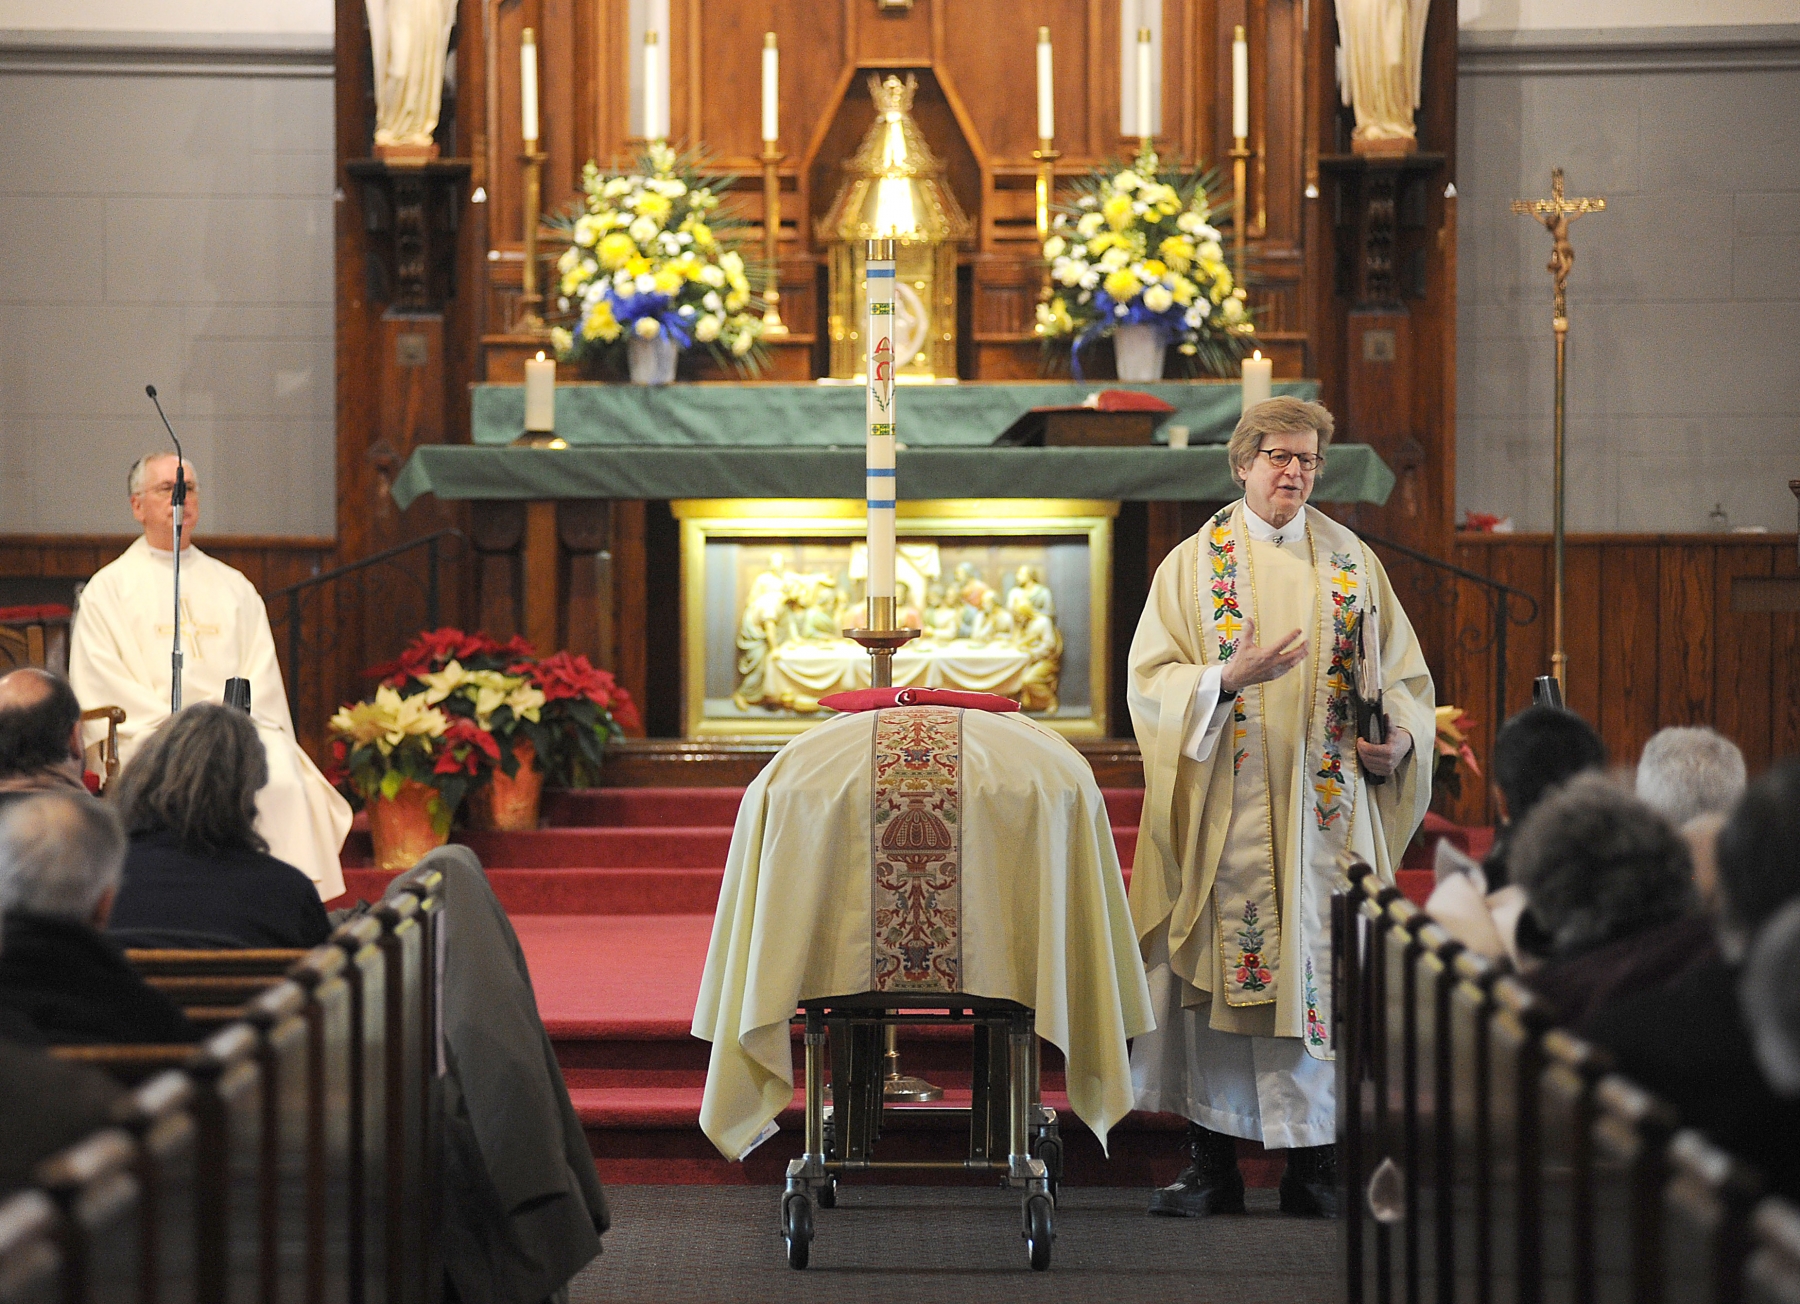 Flanked by the casket of Tibor Baranski's Father Richard Augustine speaks about the strong faith and life works of Baranski during his Funeral Mass at Christ the King Parish in Snyder. Baranski, an Amherst native, emigrated from Hungary where he helped 3000 Jews escape the nazi occupation during WWII.
Dan Cappellazzo/Staff photographer